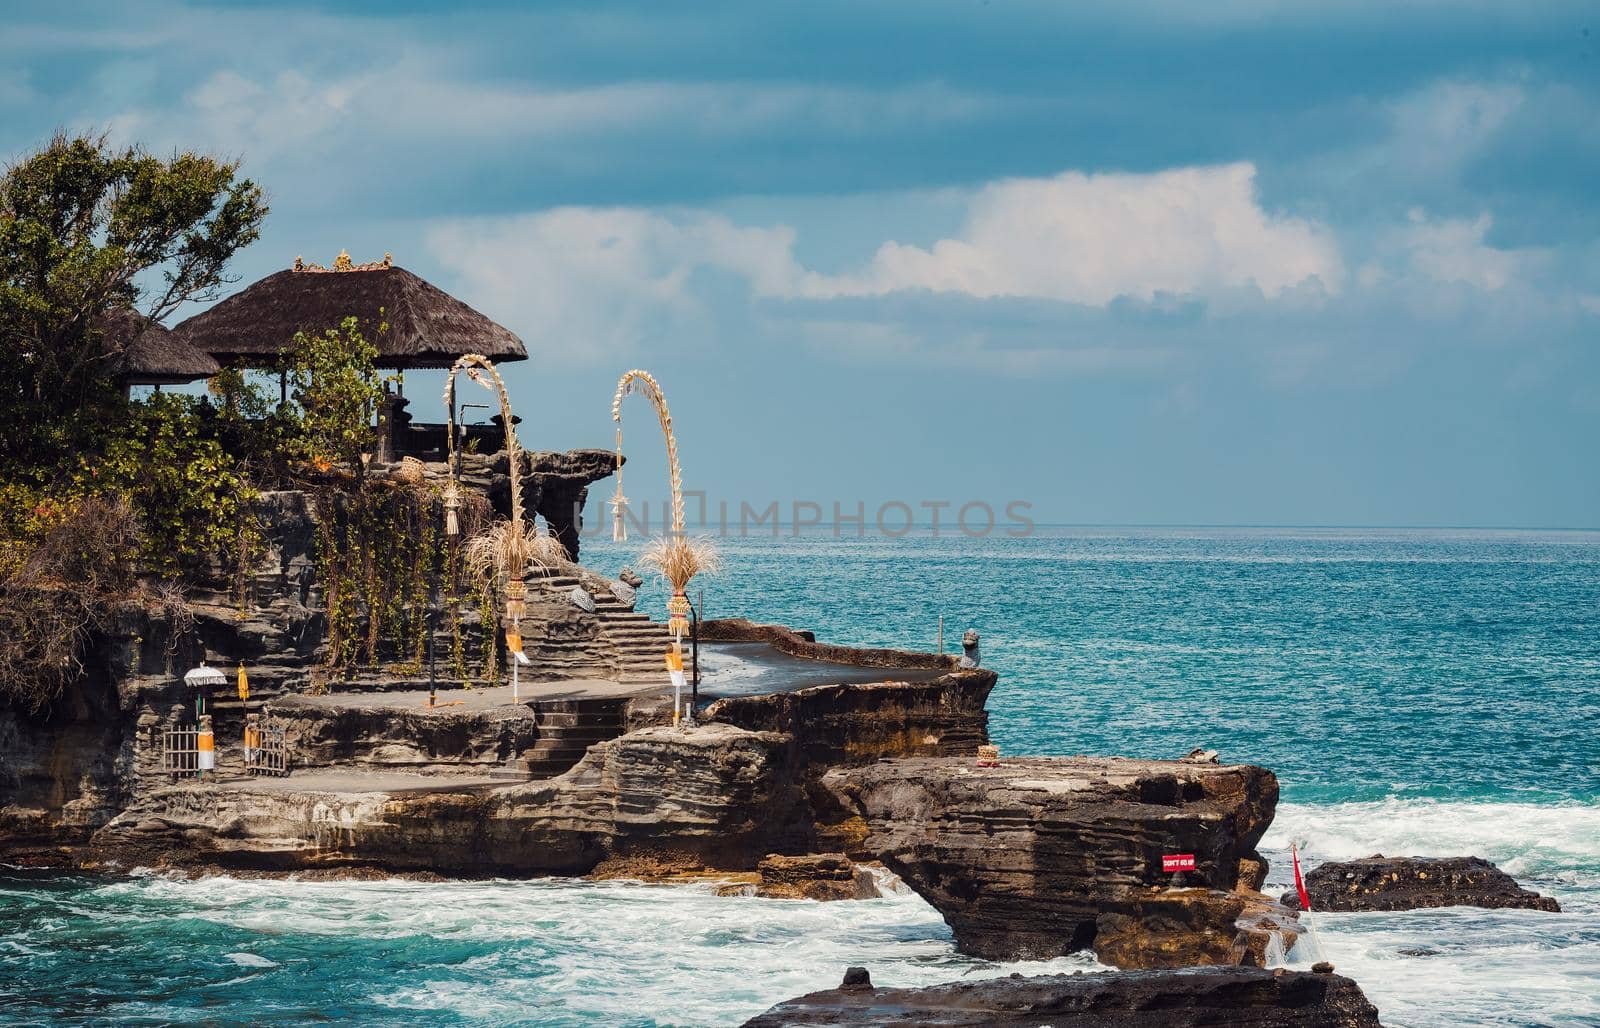 Tanah Lot temple in Bali Indonesia by artush